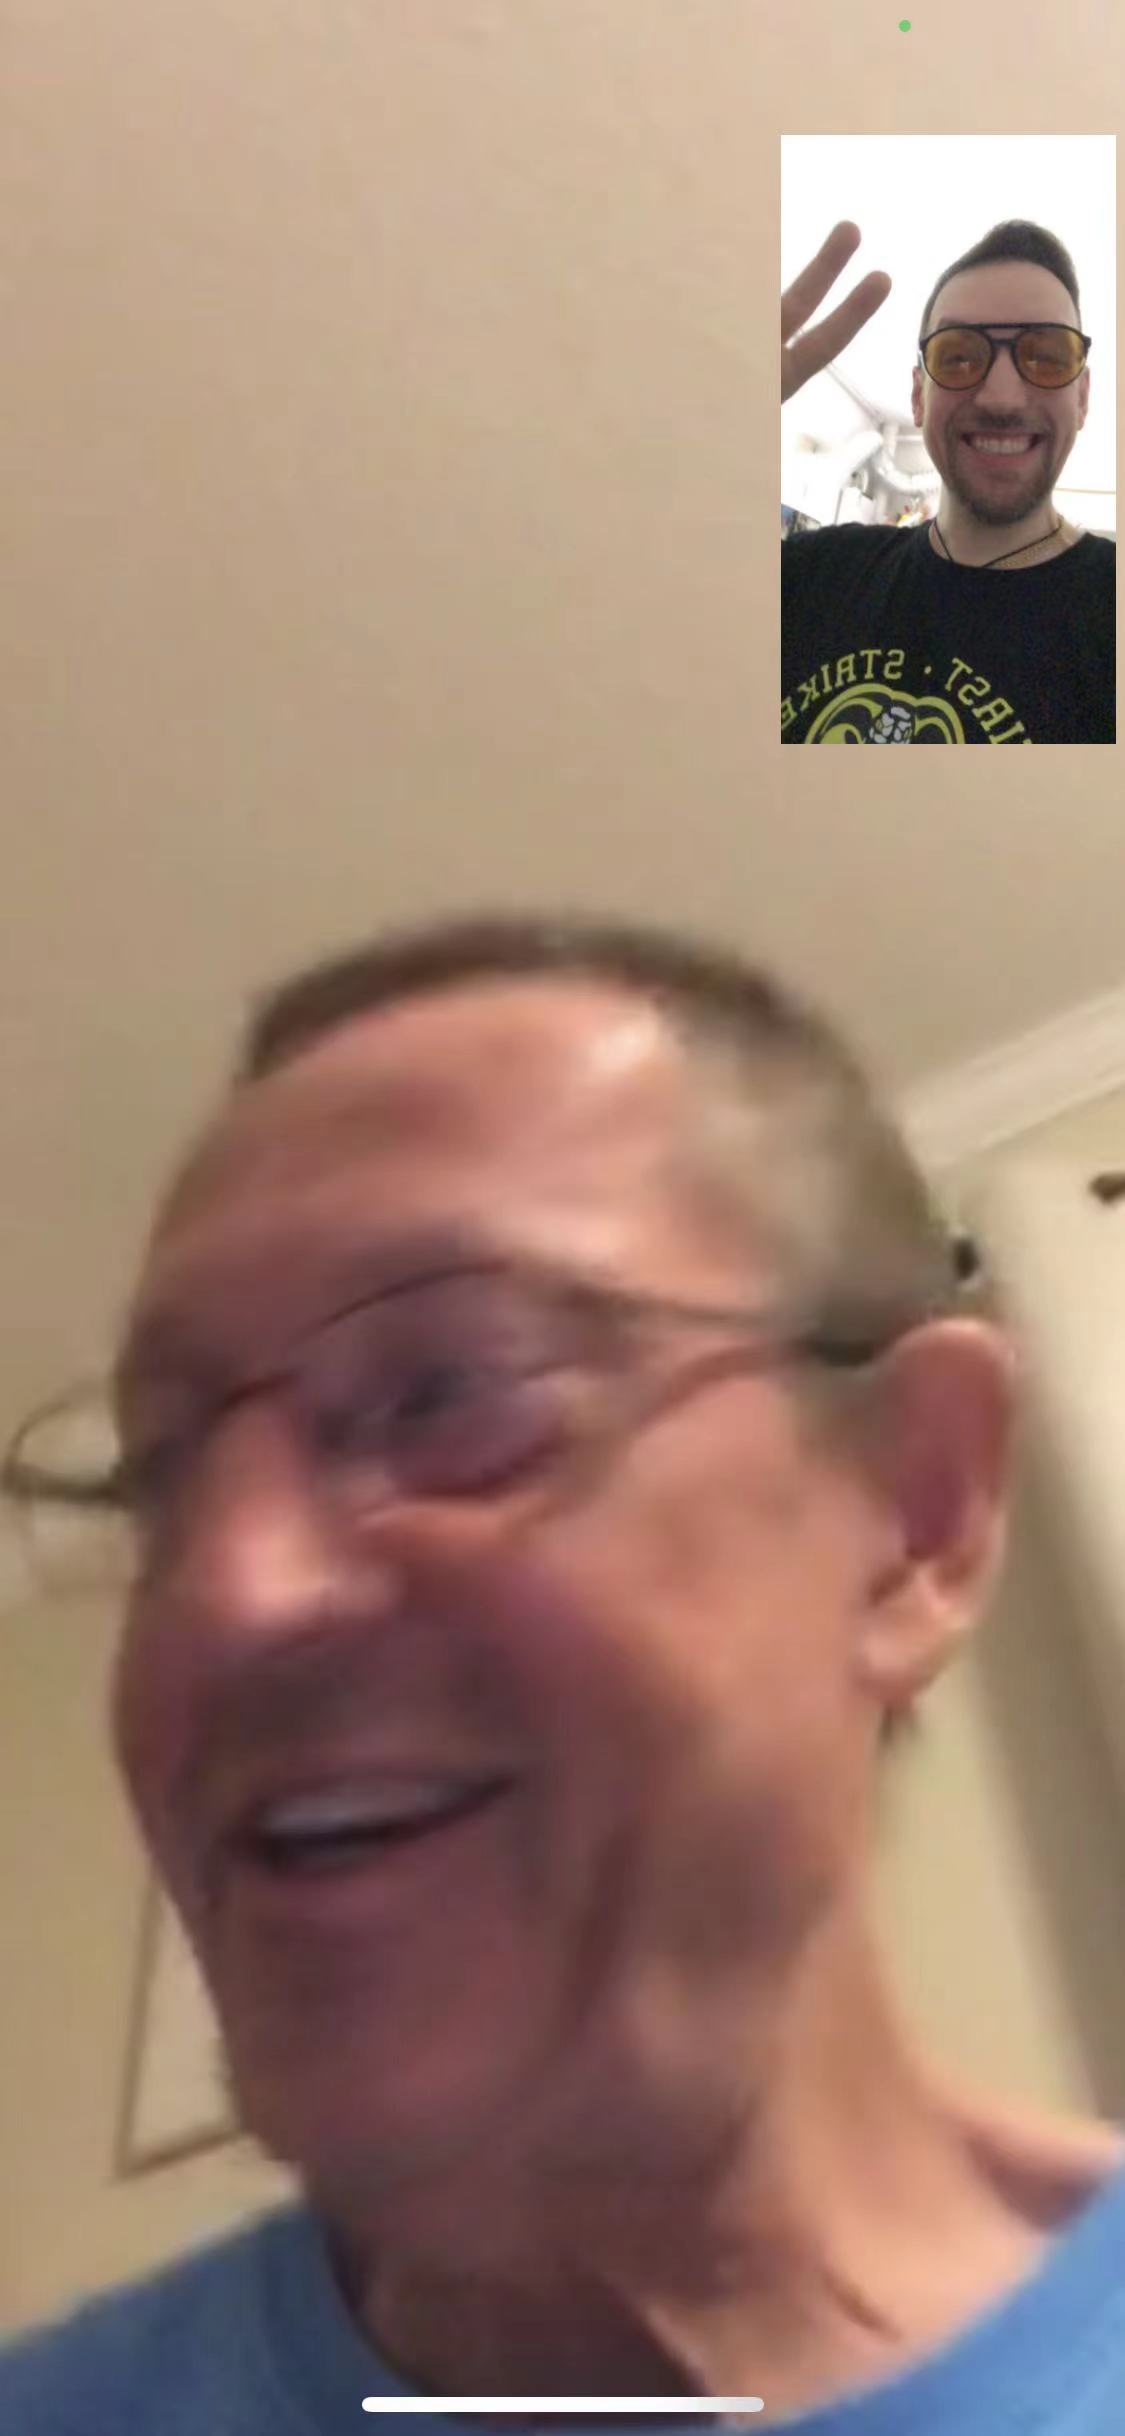 Making my dad laugh on Father's Day via WeChat video call.